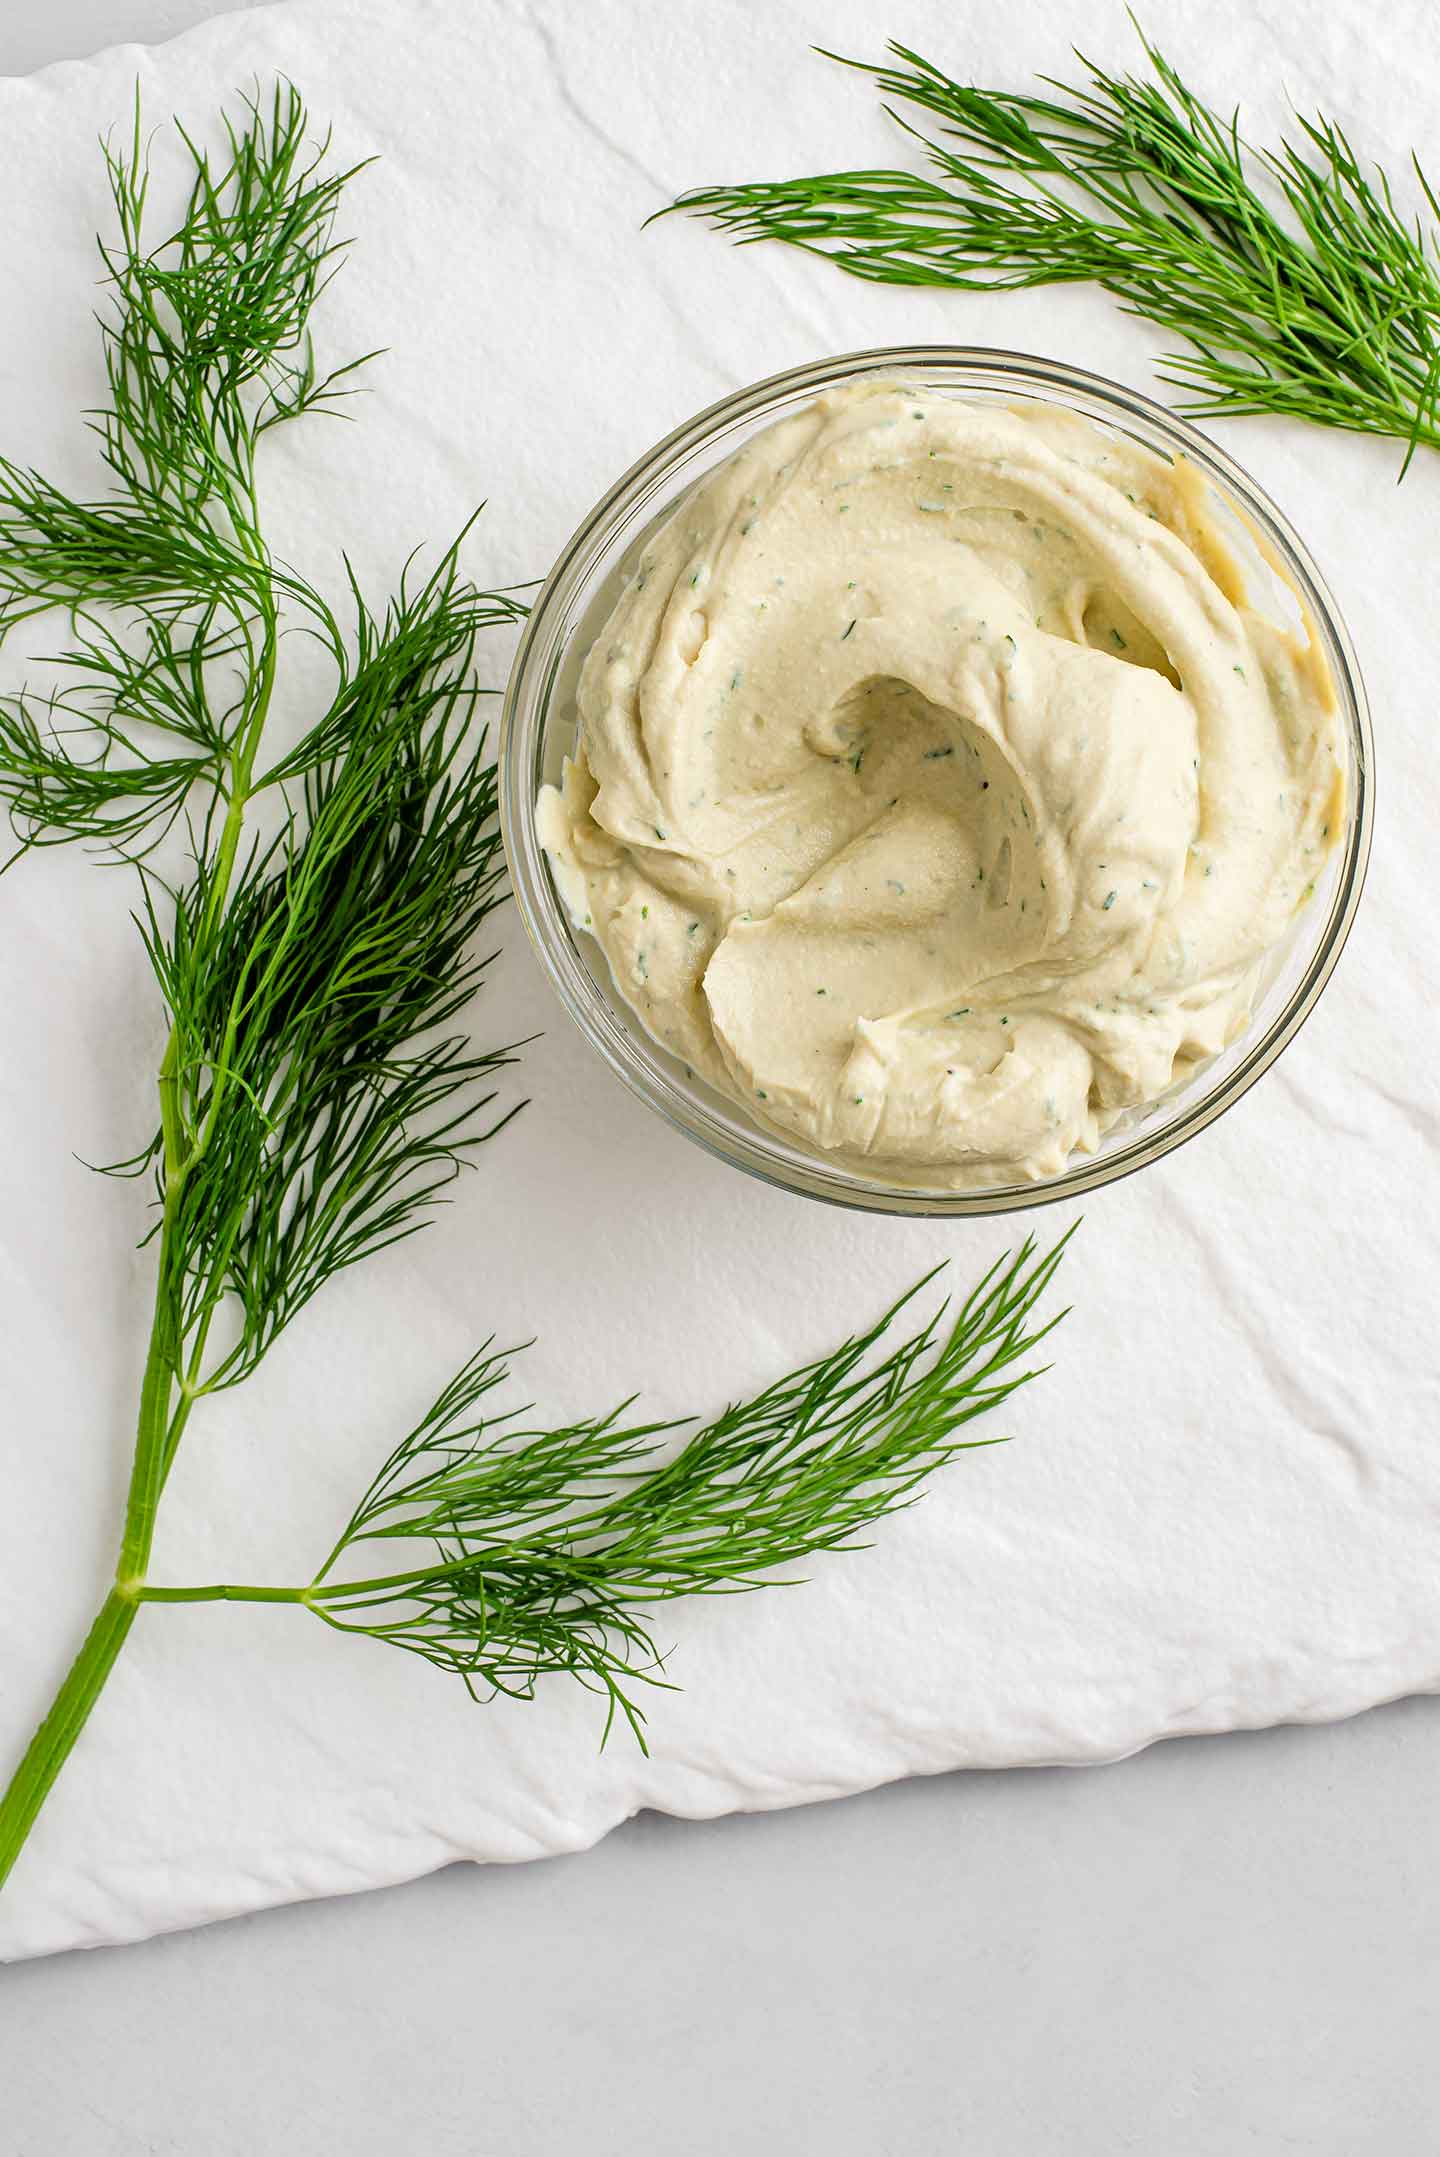 Top down view of vegan cream cheese with flecks of dill in a small glass dish on a white tray. Sprigs of fresh dill surround the dish.